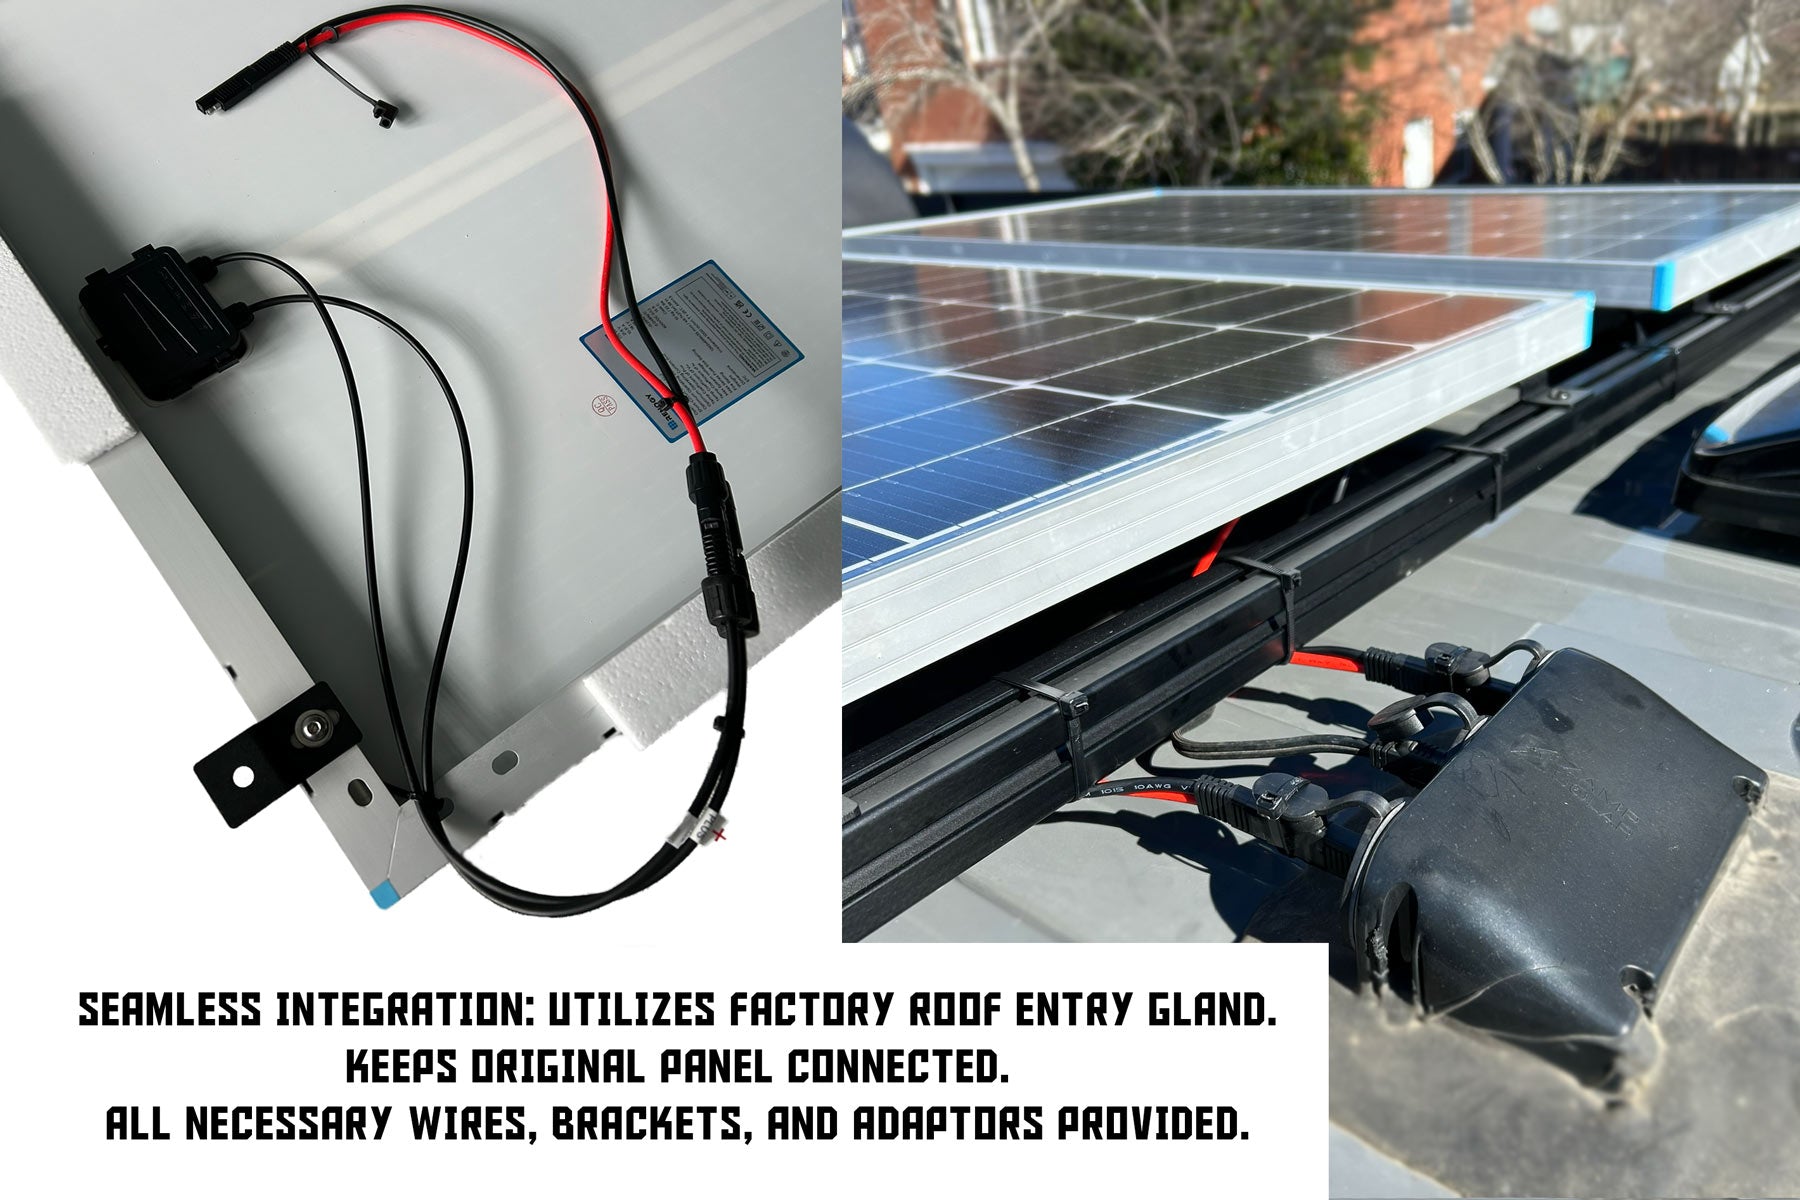 Seamless Integration to solis pocket utilizing factory roof gland